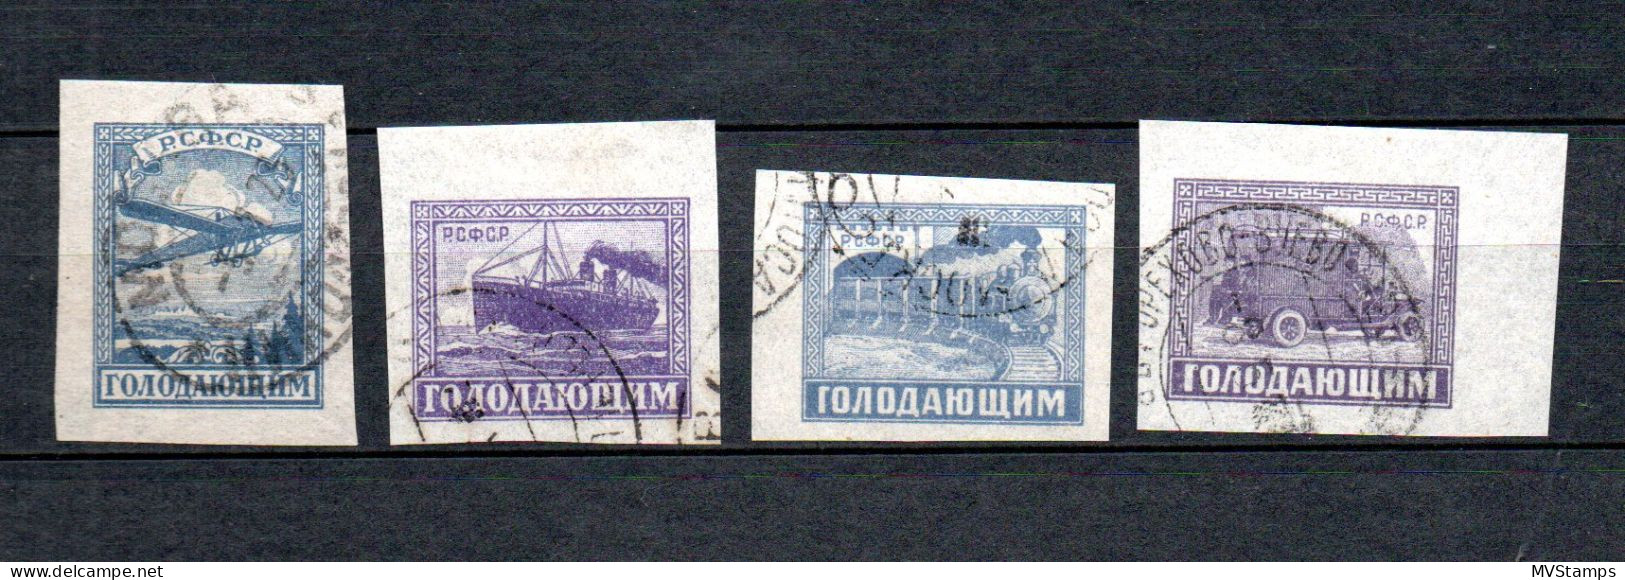 Russia 1922 Old Set Hunger-help/Transport Stamps (Michel 191/94) Nice Used - Used Stamps